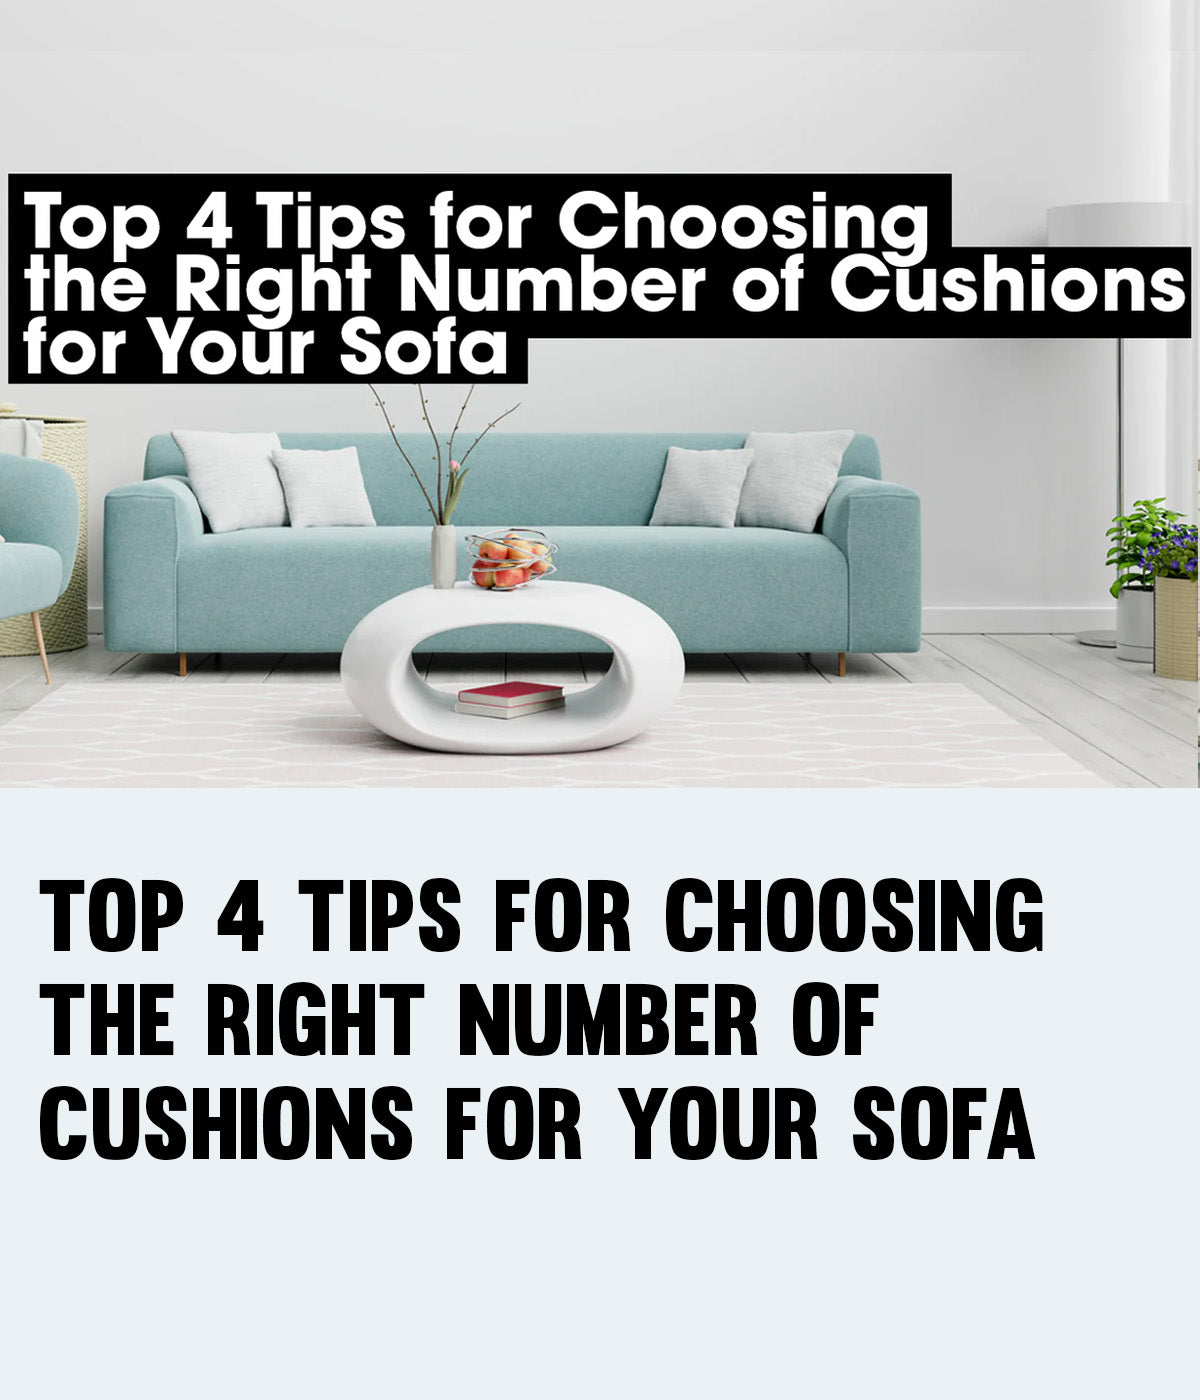 Choosing the right number of 40x40 cushions on your sofa